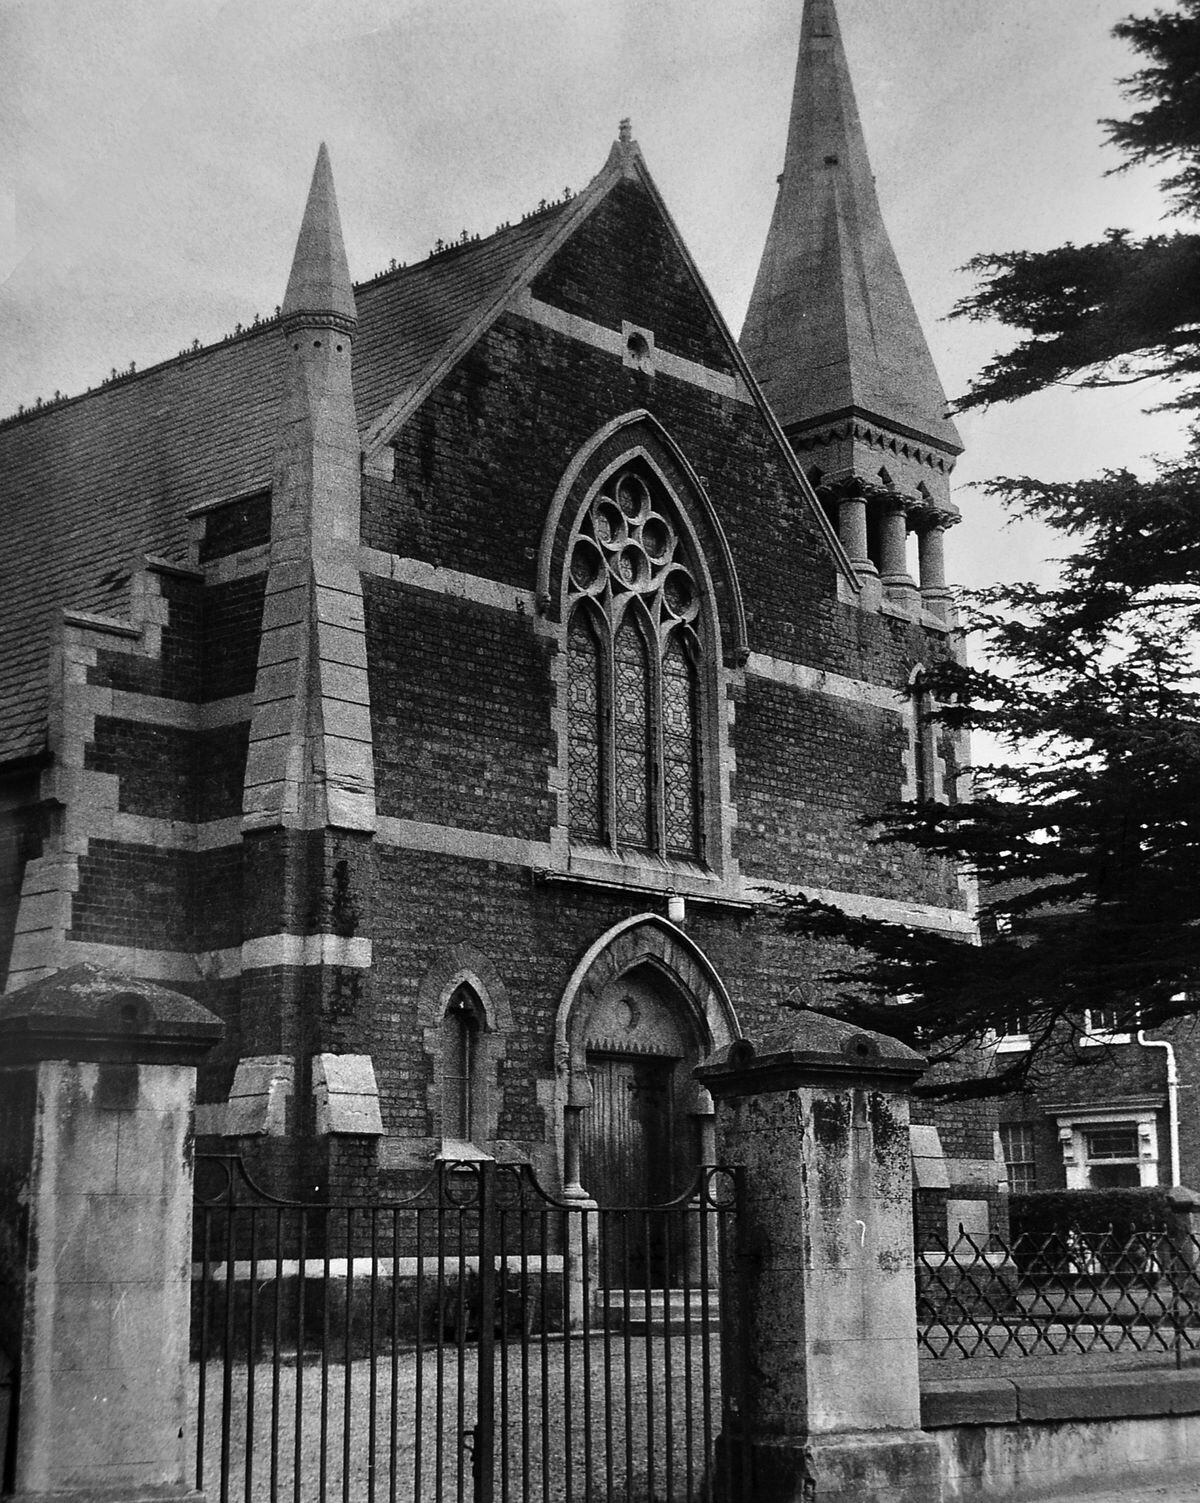 The old Methodist Church off Shrewsbury Road photographed in April 1966. The building is long gone, having been demolished in the 1980s after a violent wind caused irreparable damage